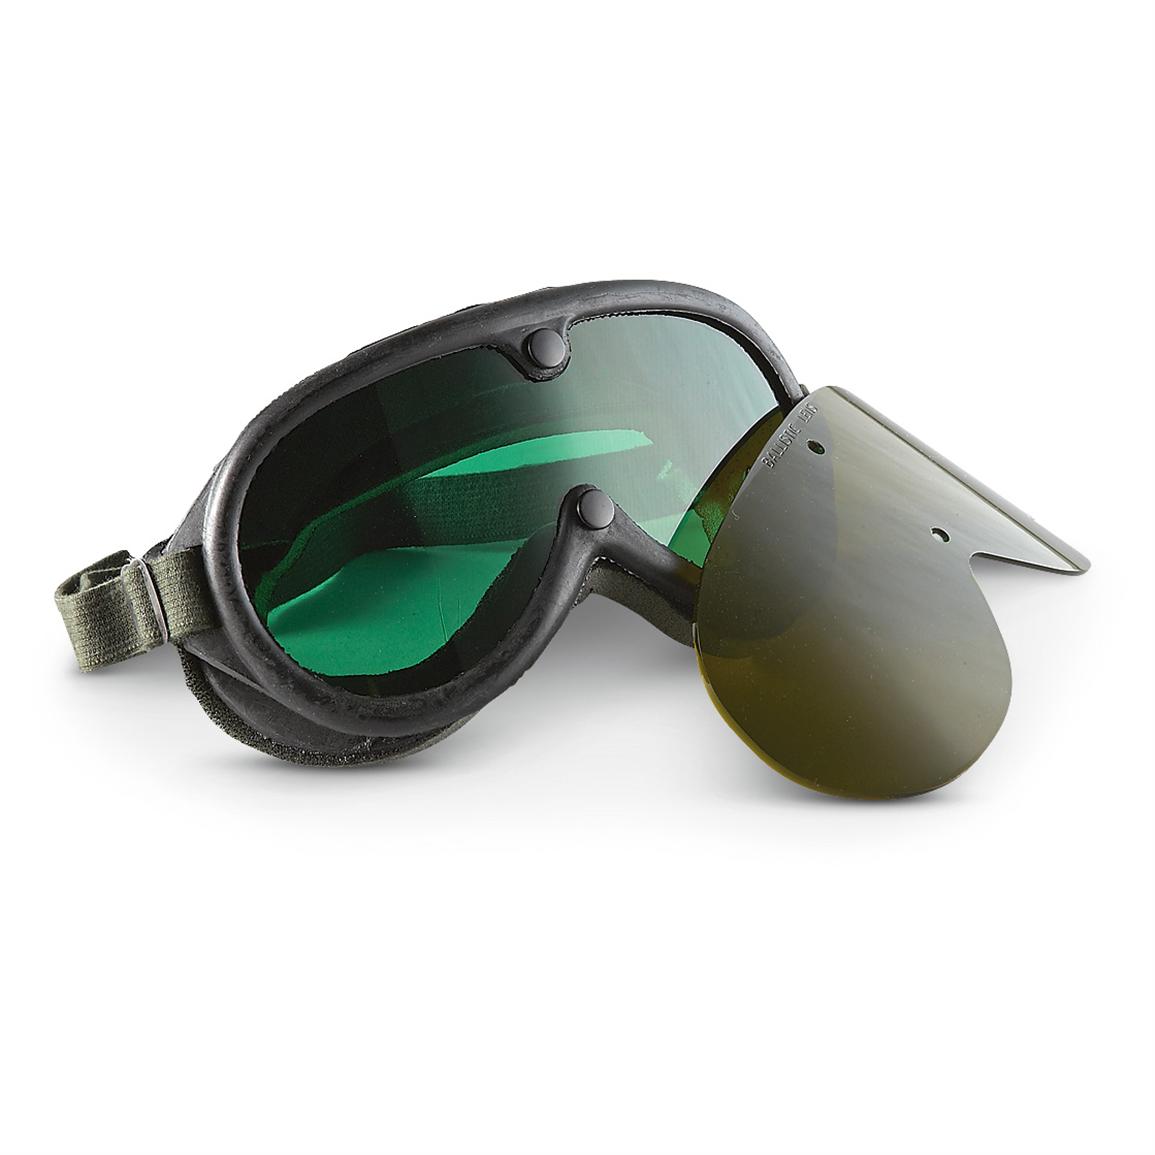 New U S Military Ballistic Goggles Black 207466 Goggles And Eyewear At Sportsman S Guide